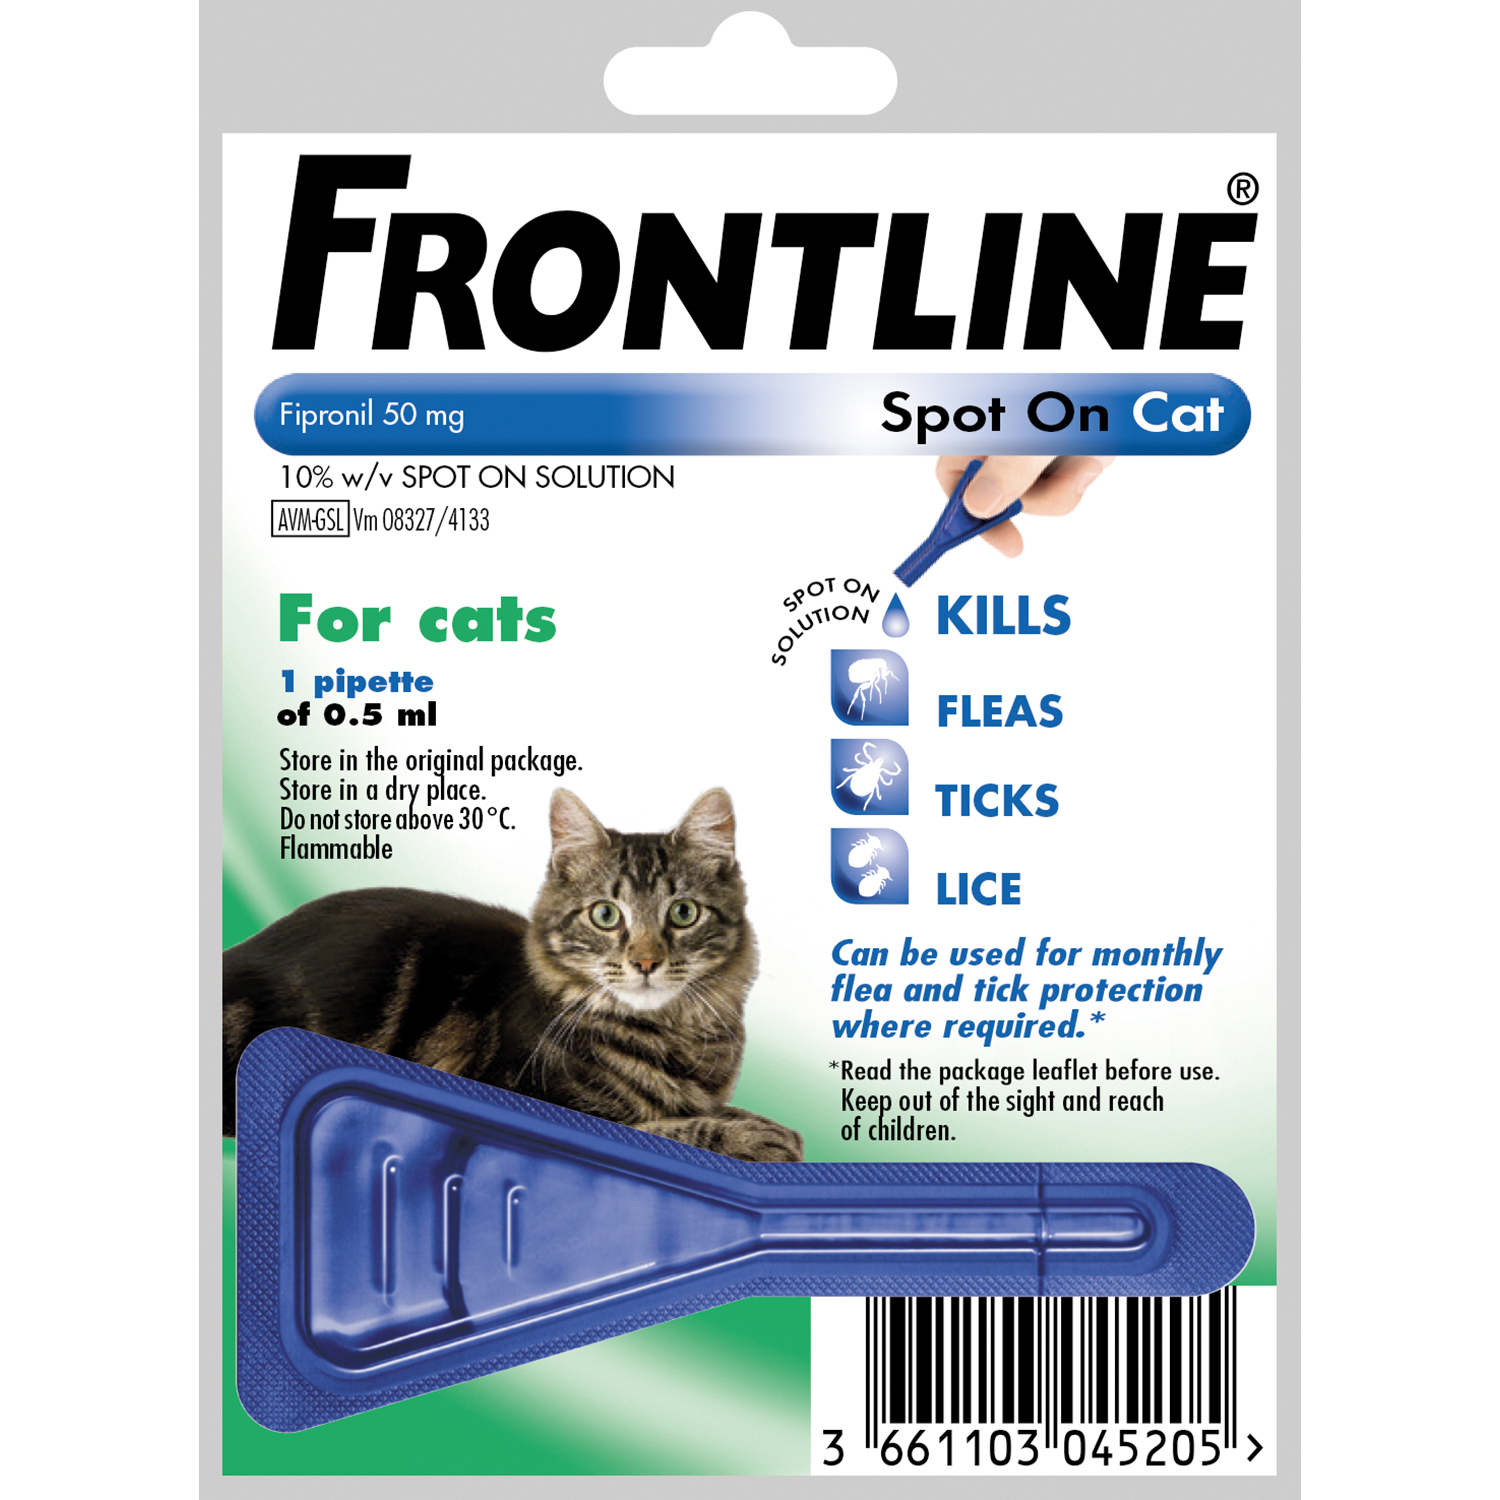 FRONTLINE SPOT ON FOR CATS 1 PIPETTE 1 PIPETTE